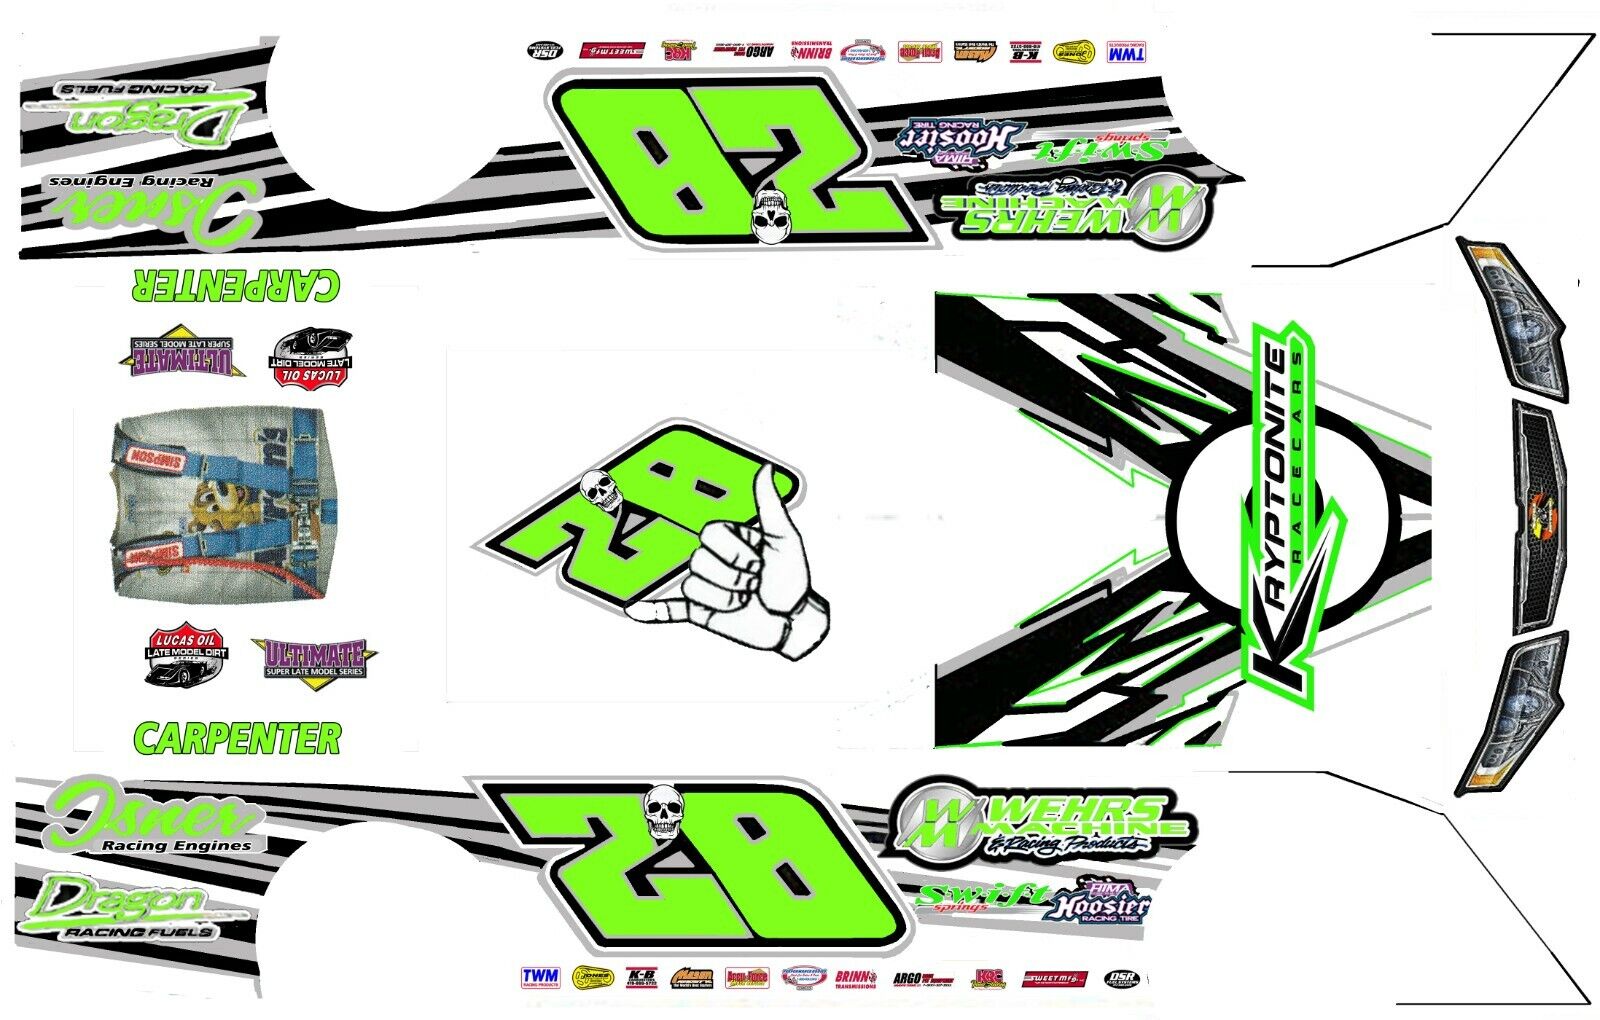 Animer and price revision #28 Kryptonite Race Cars Crate Dirt Wate Late 1 Model Manufacturer OFFicial shop 24th Scale